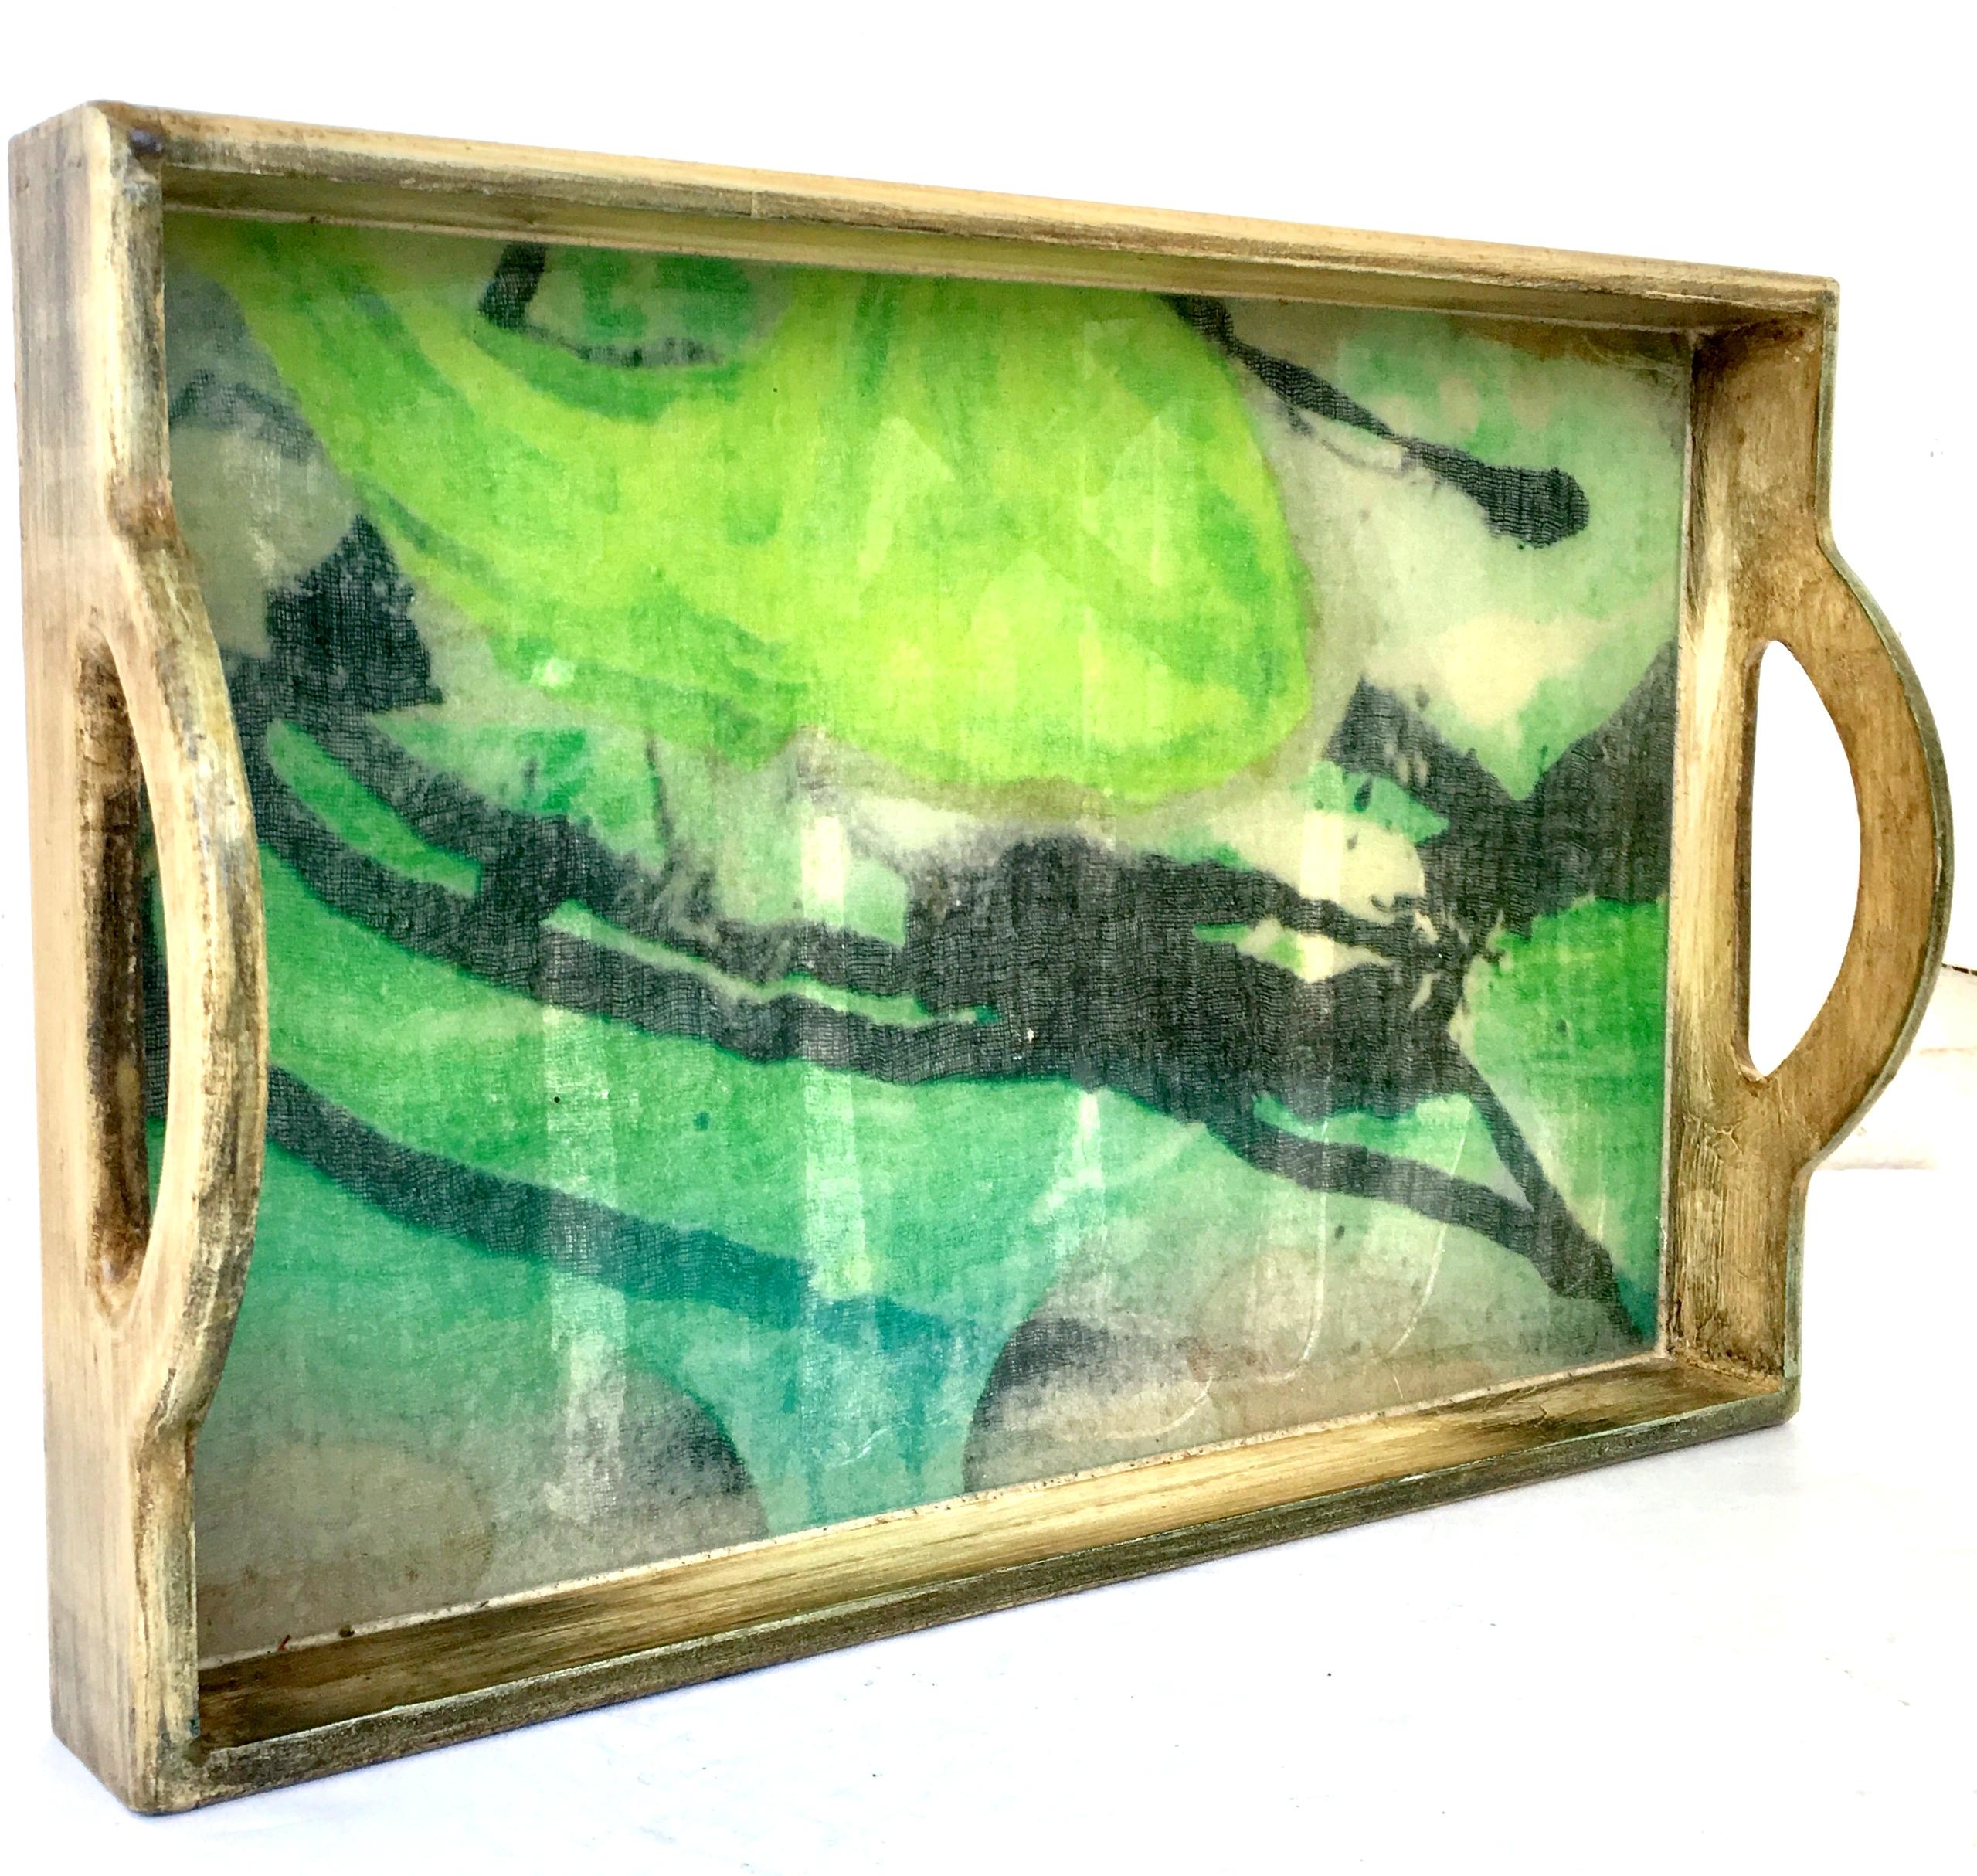 21st Century & new solid wood printed Belgium linen under clear Lucite cutout handle serving tray. This organic modern rectangular tray features solid wood faux distressed lacquered finish and a abstract vibrant green and black motif printed Belgium